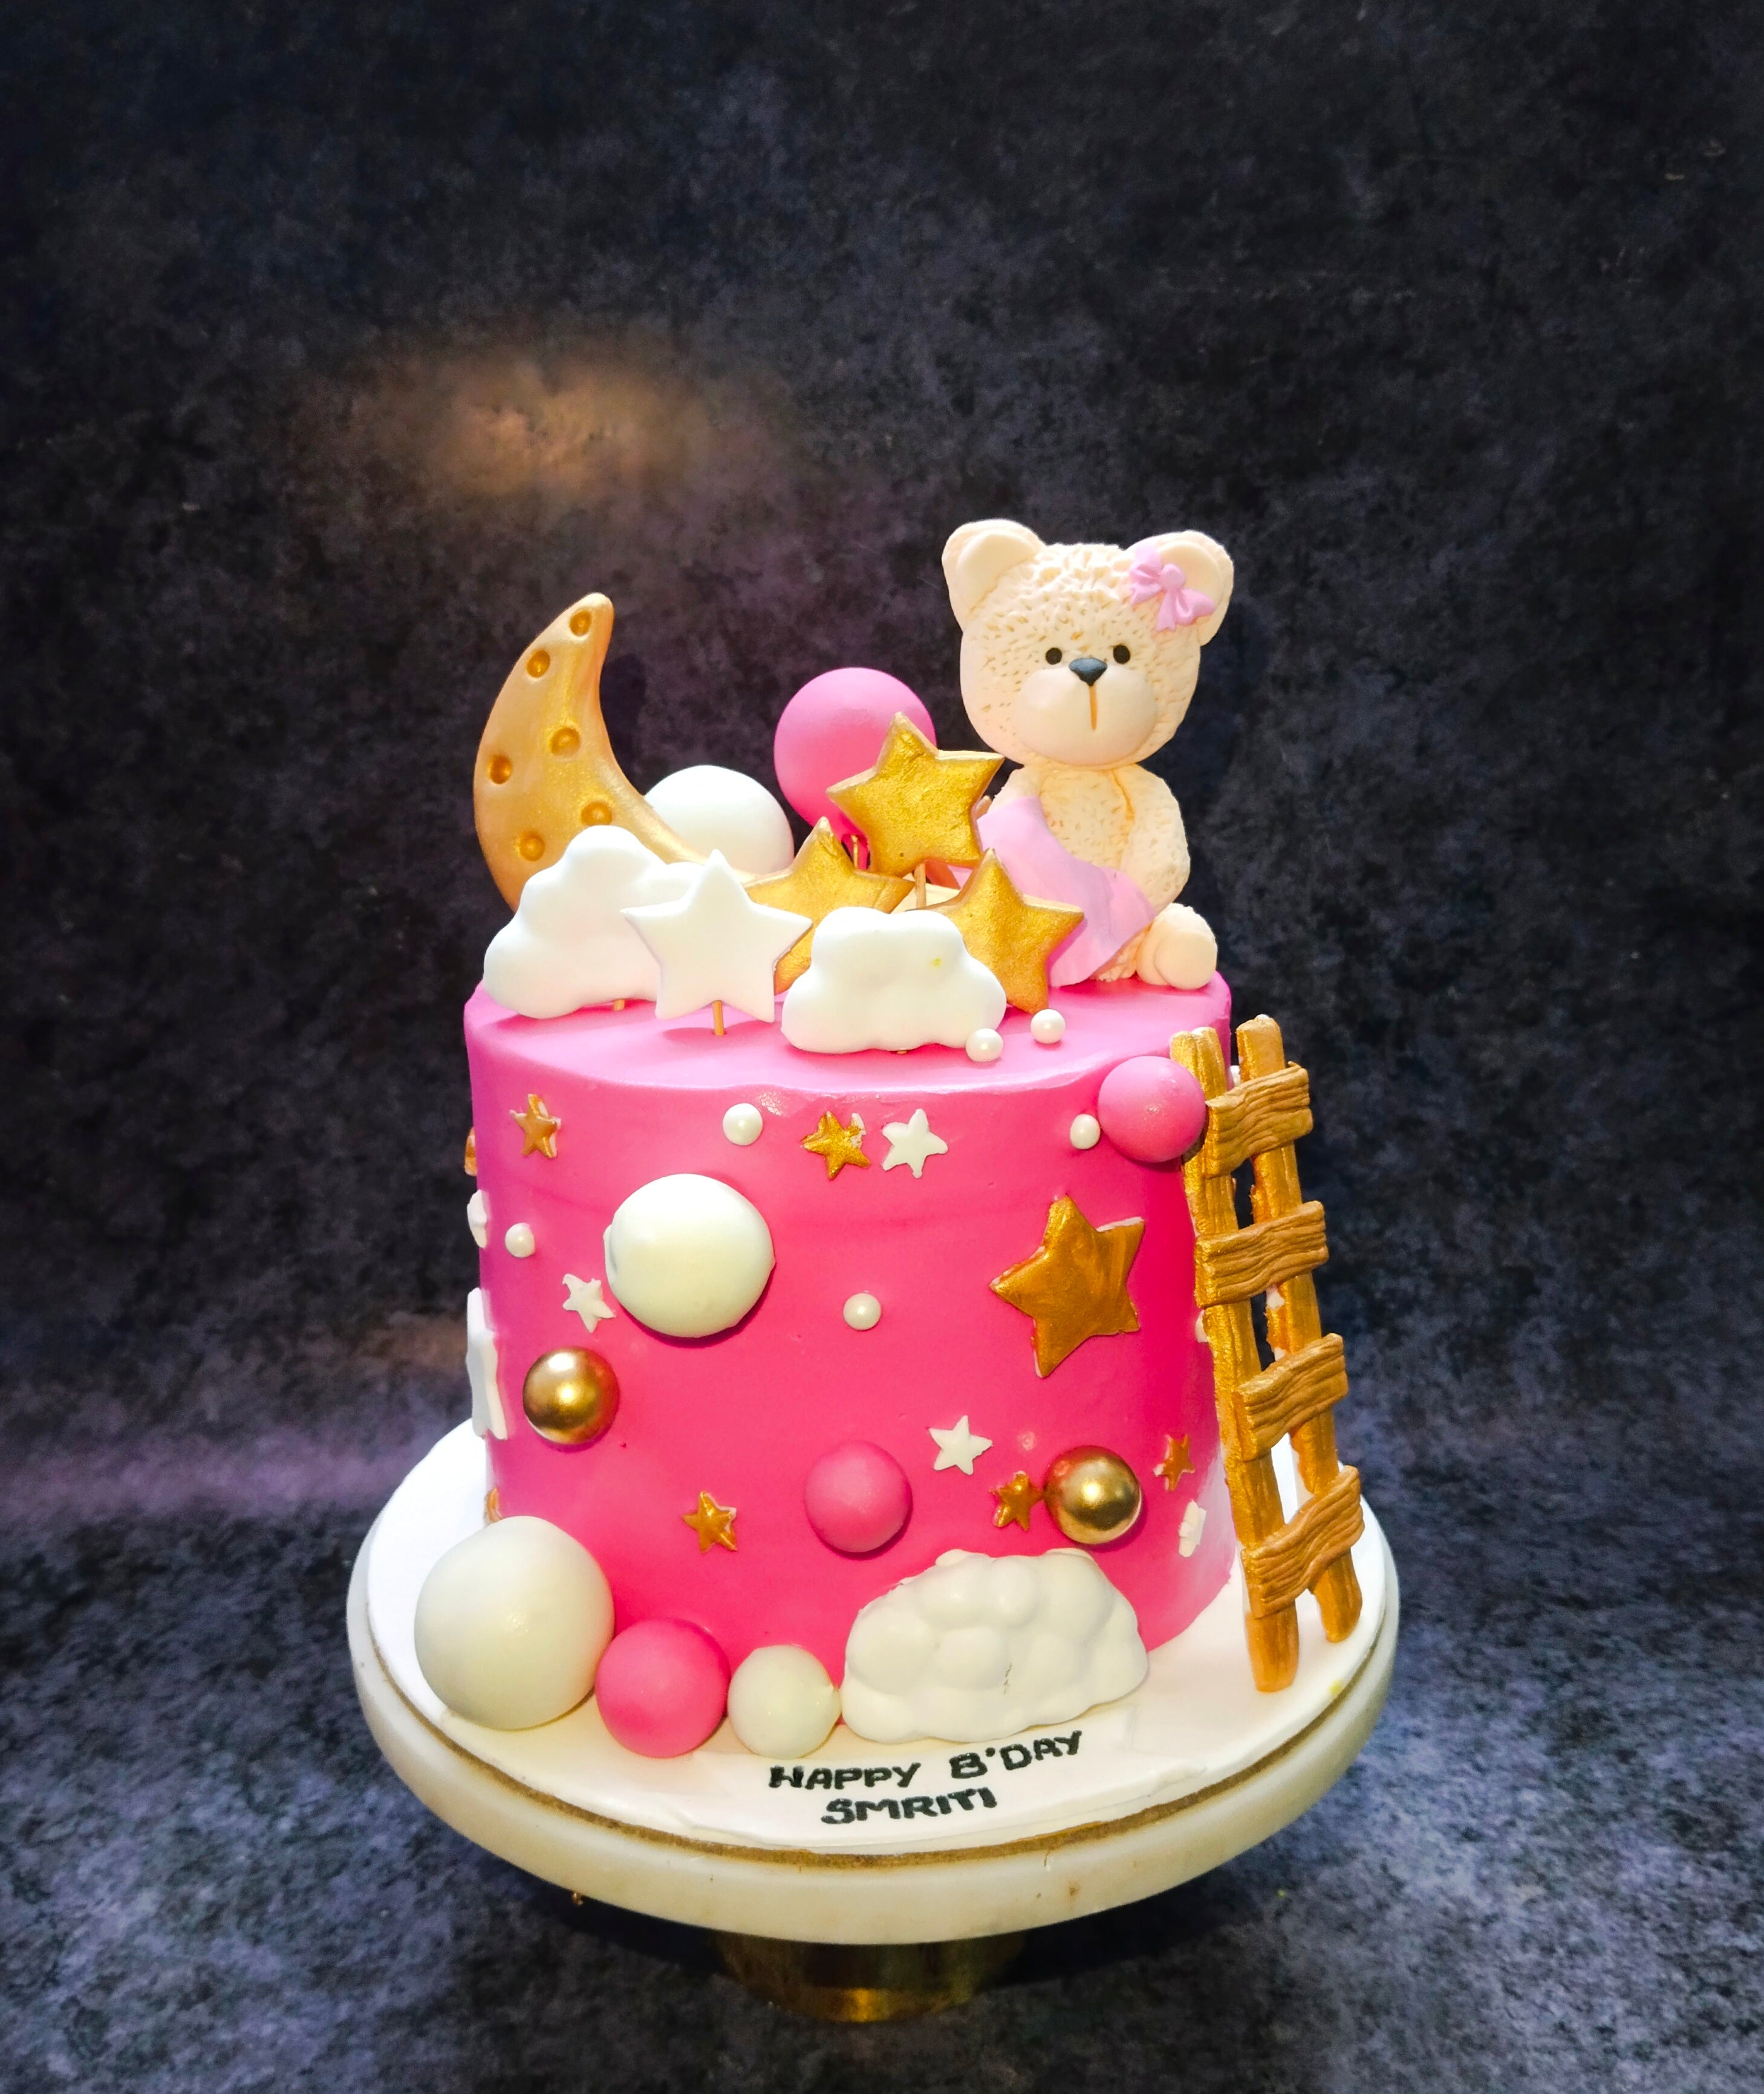 5 Off] Order 'Teddy Bear Photo Birthday Cake' Online | Urgent Delivery  Across London // Sugaholics™